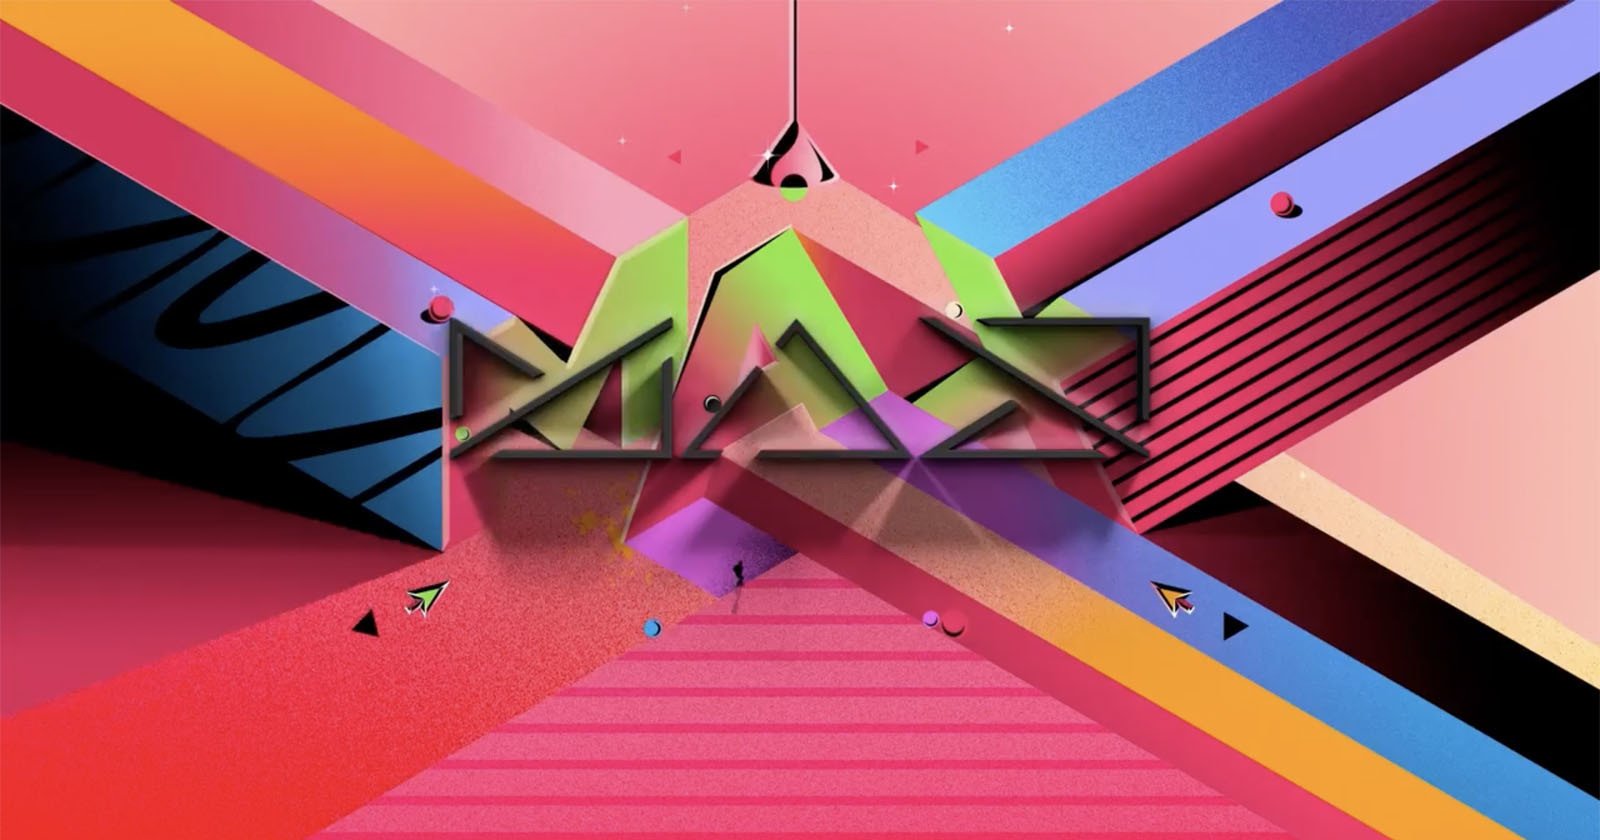 Adobe MAX is Returning to In-Person This Year